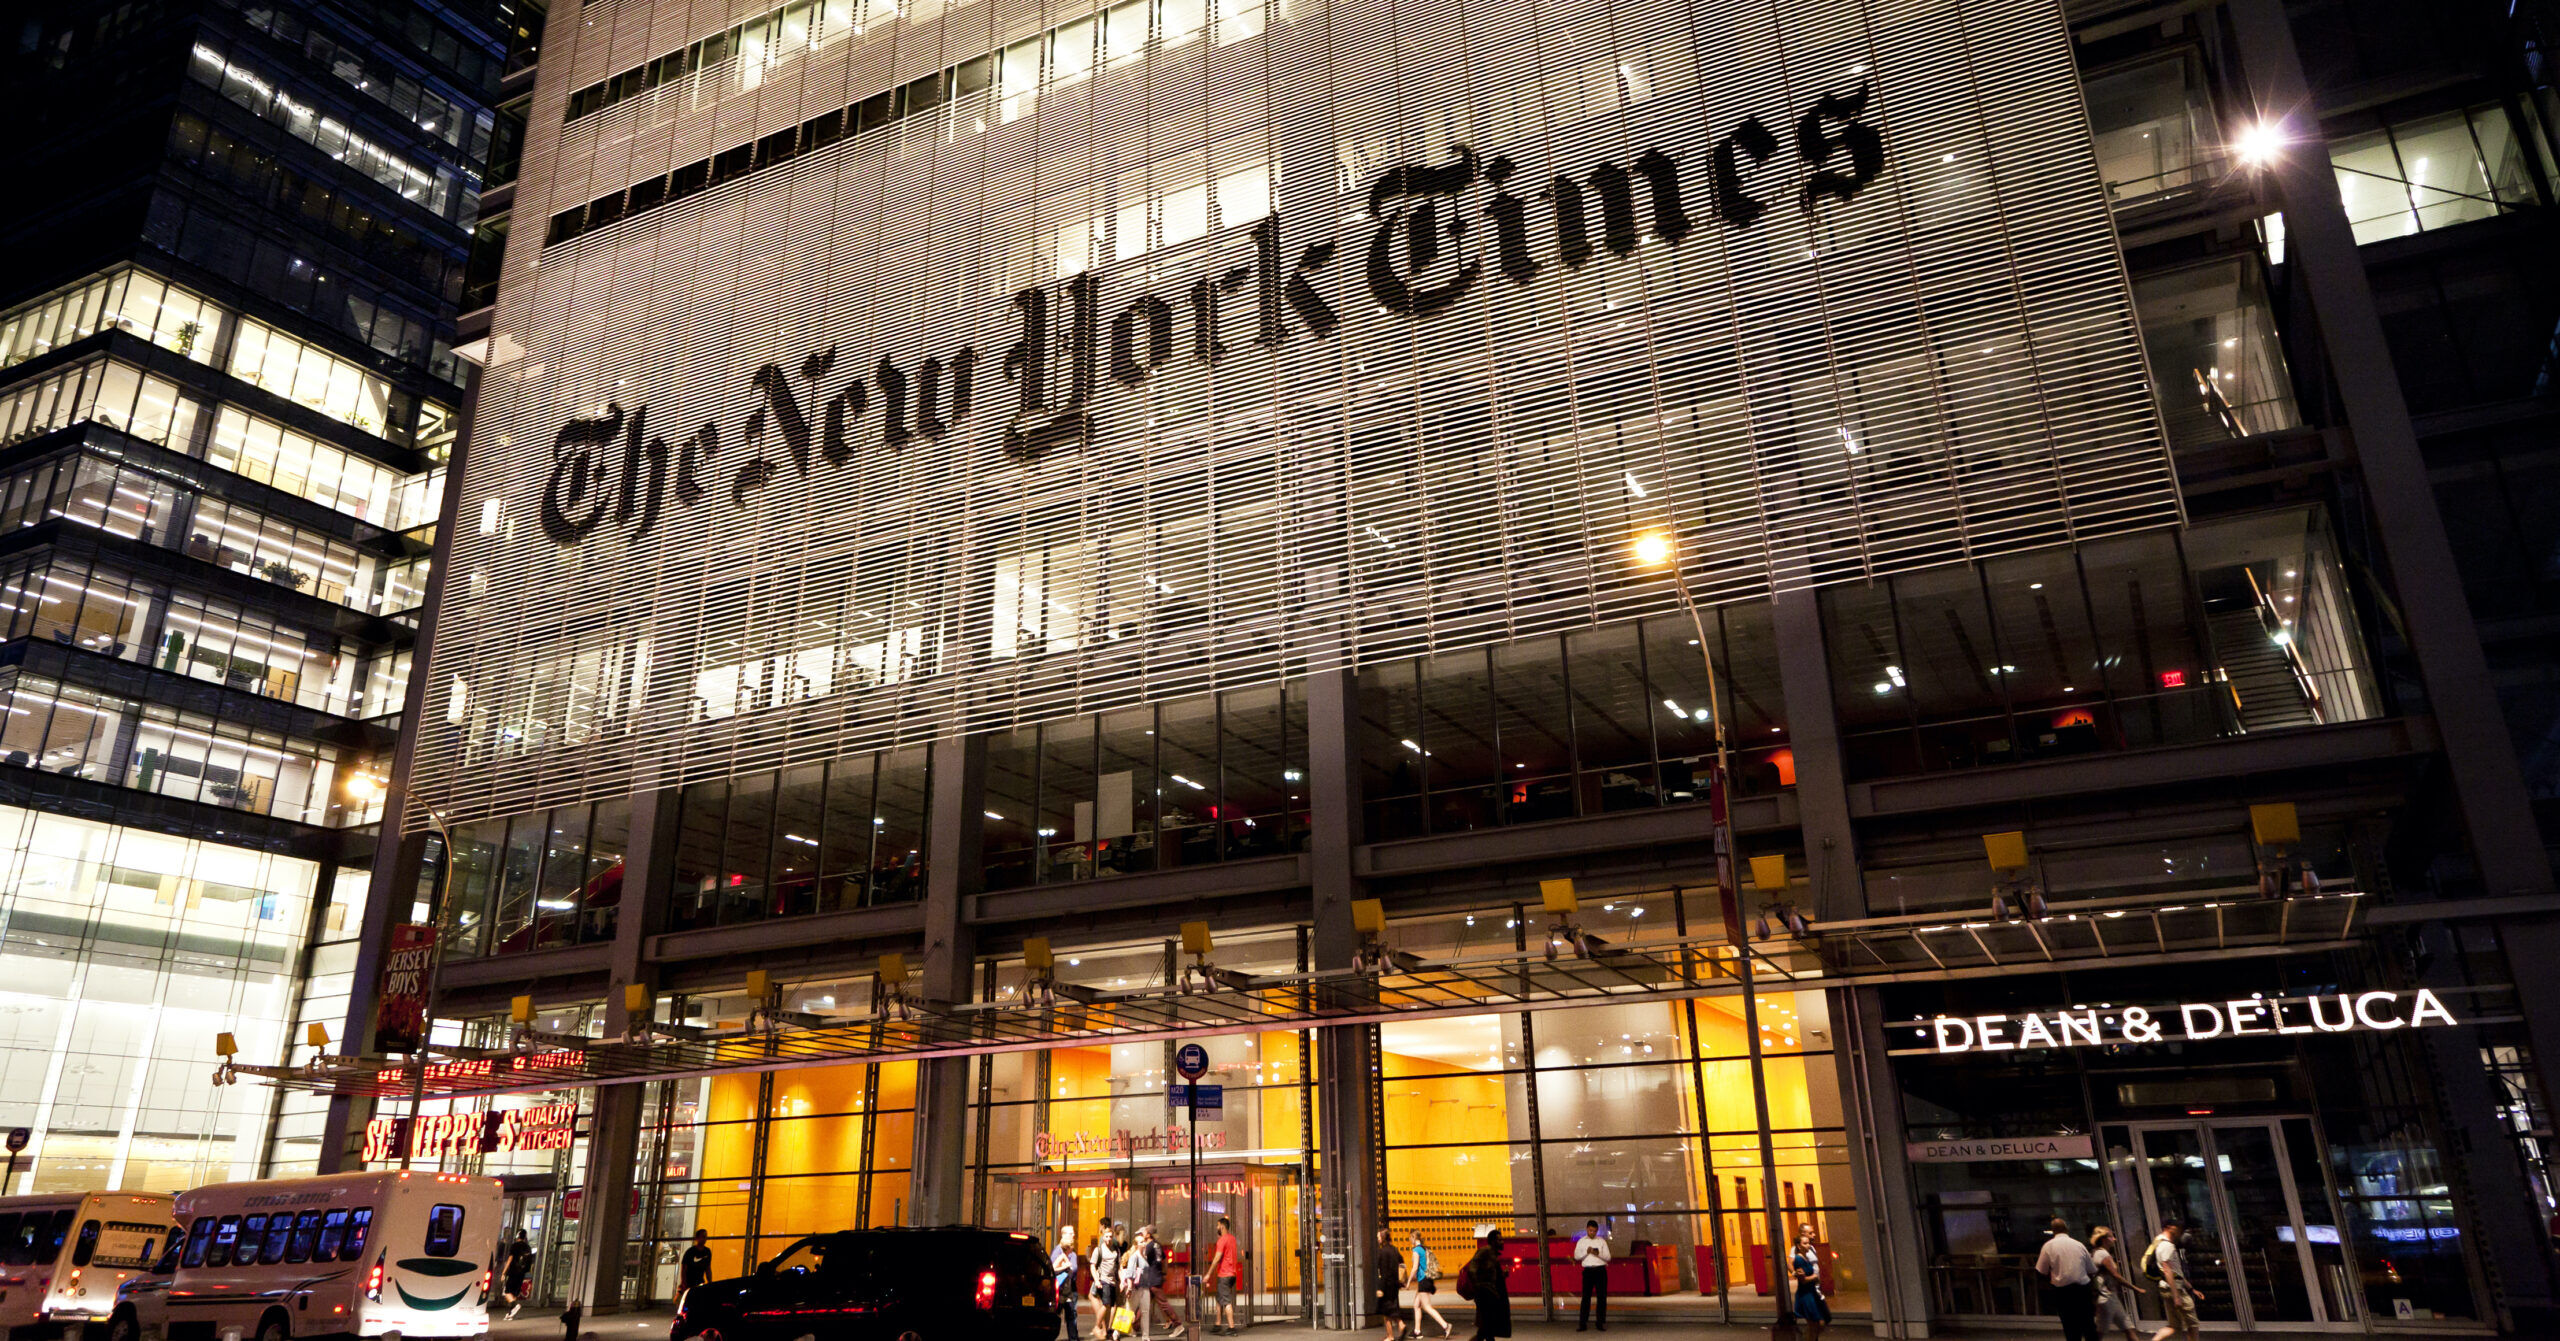 New York, NY, USA - July 11, 2016: Headquarters of The New York Times in night